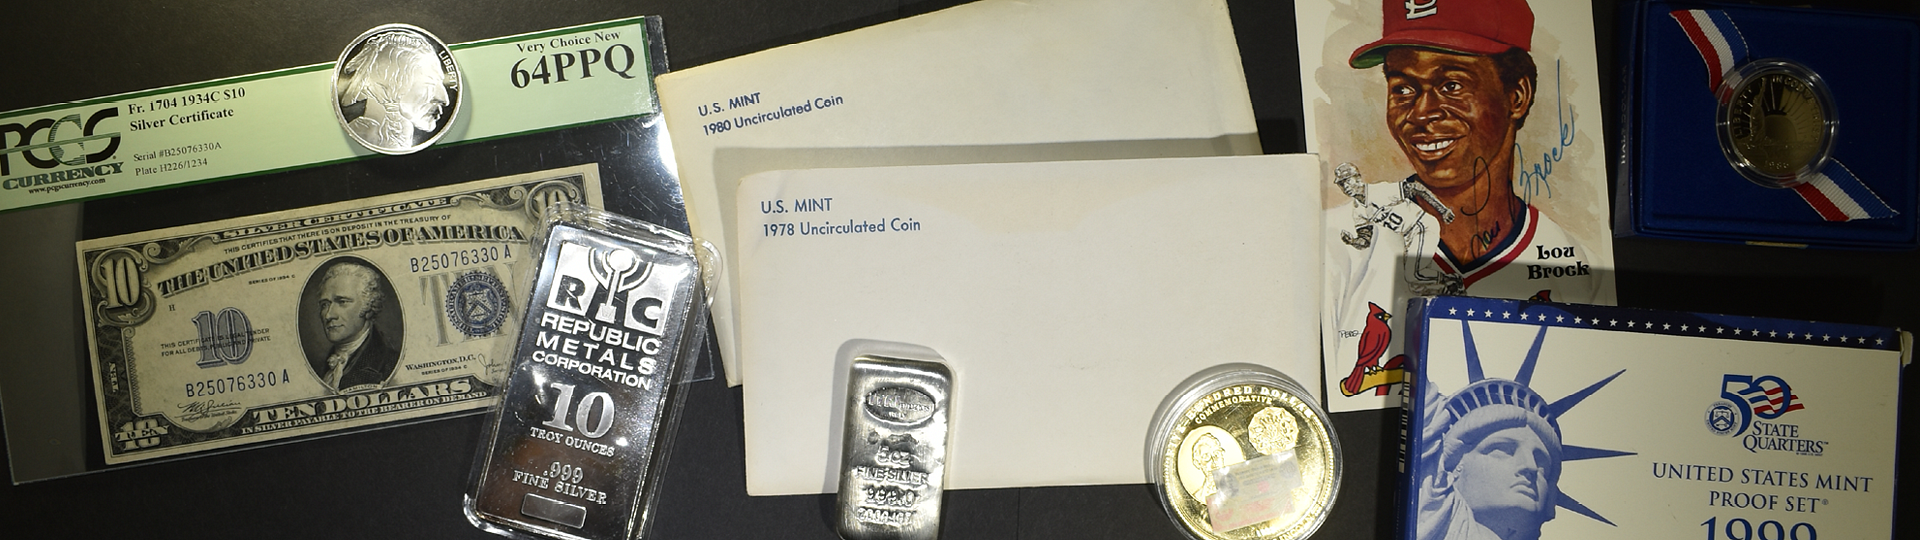 December 6th Silver City Rare Coin & Currency Auction by Silver City Auctions